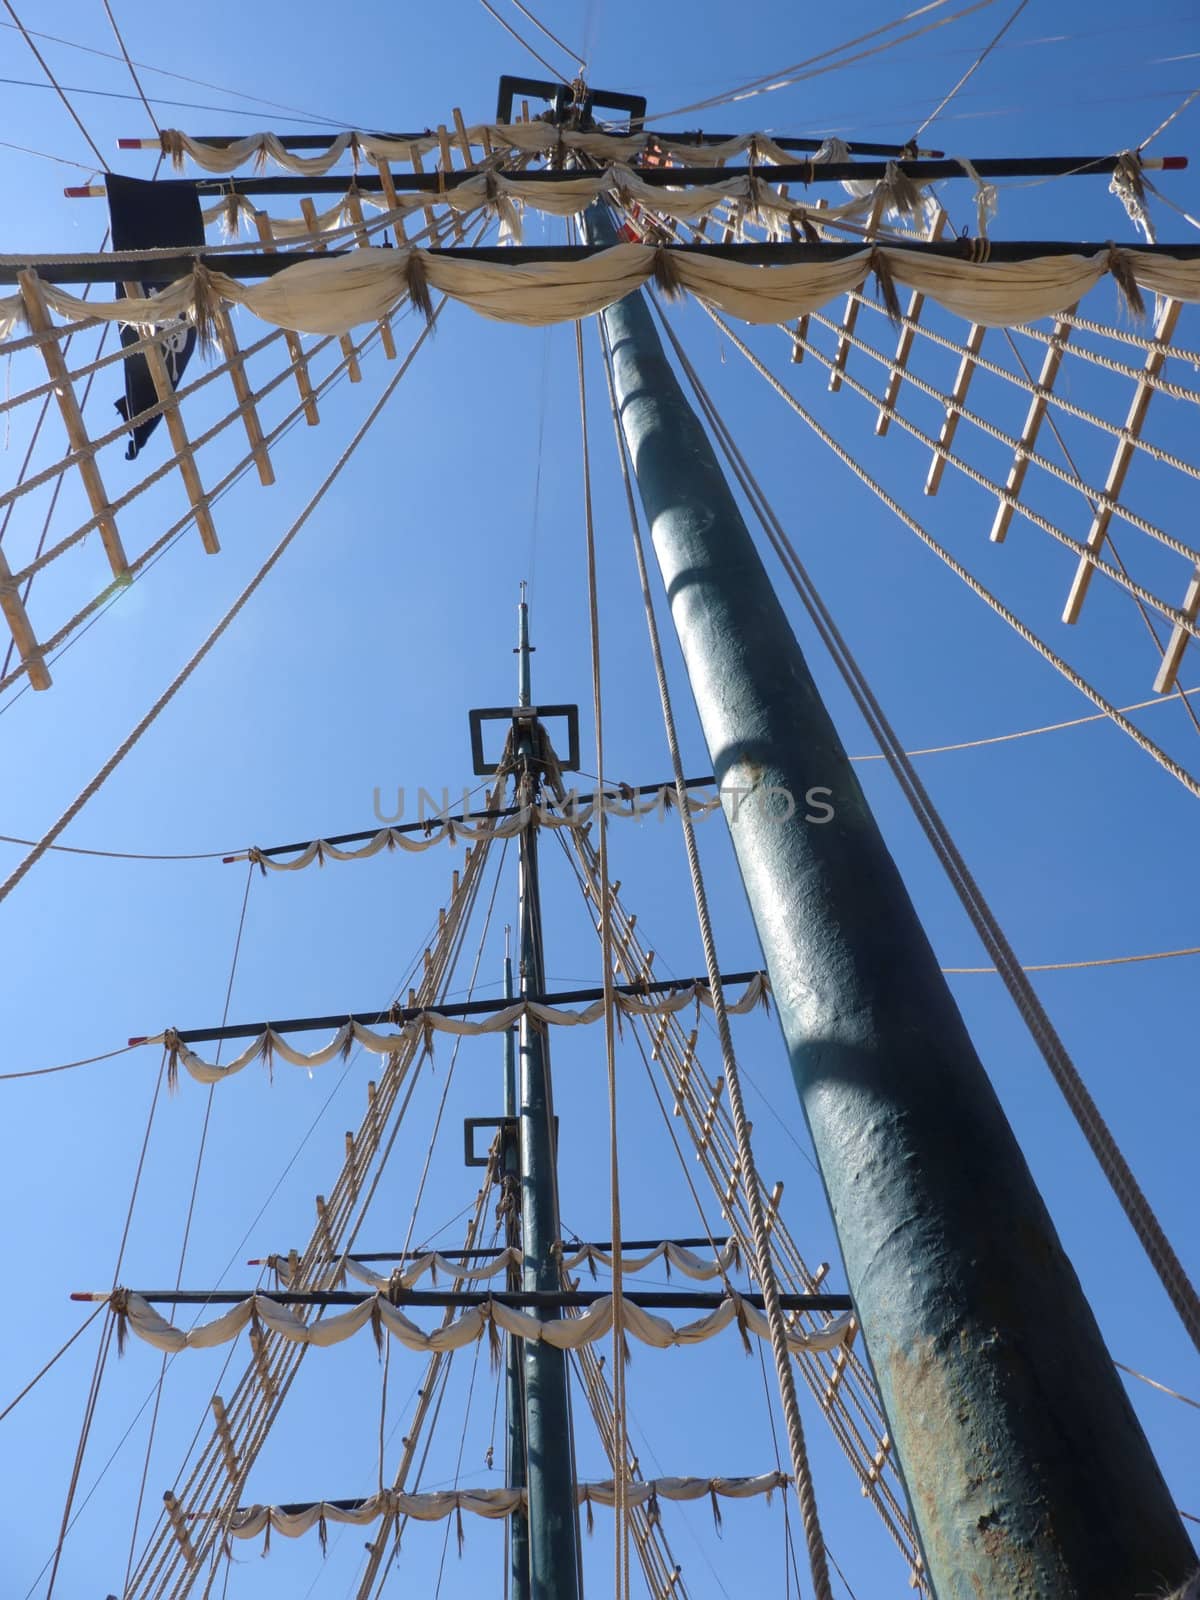 a boat masts and rigging